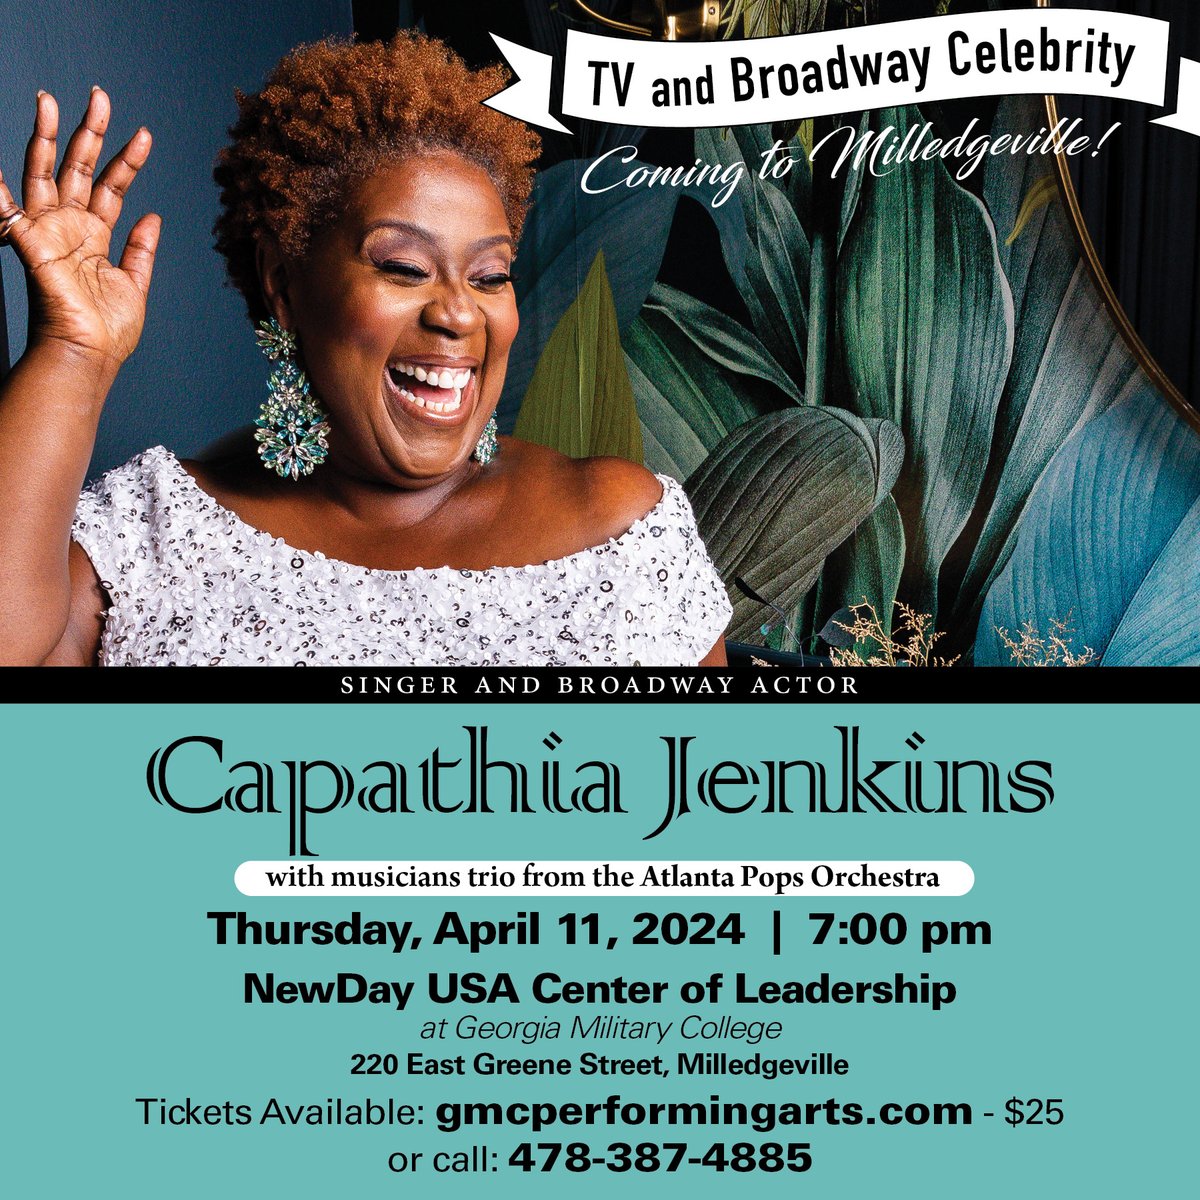 Don't miss out on an unforgettable evening with the incredible Capathia Jenkins! 🌟 Join us this Thursday at GMC's Center of Leadership for a mesmerizing performance you won't want to miss. Secure your tickets now! 🎟️ ow.ly/pF1150RbluK